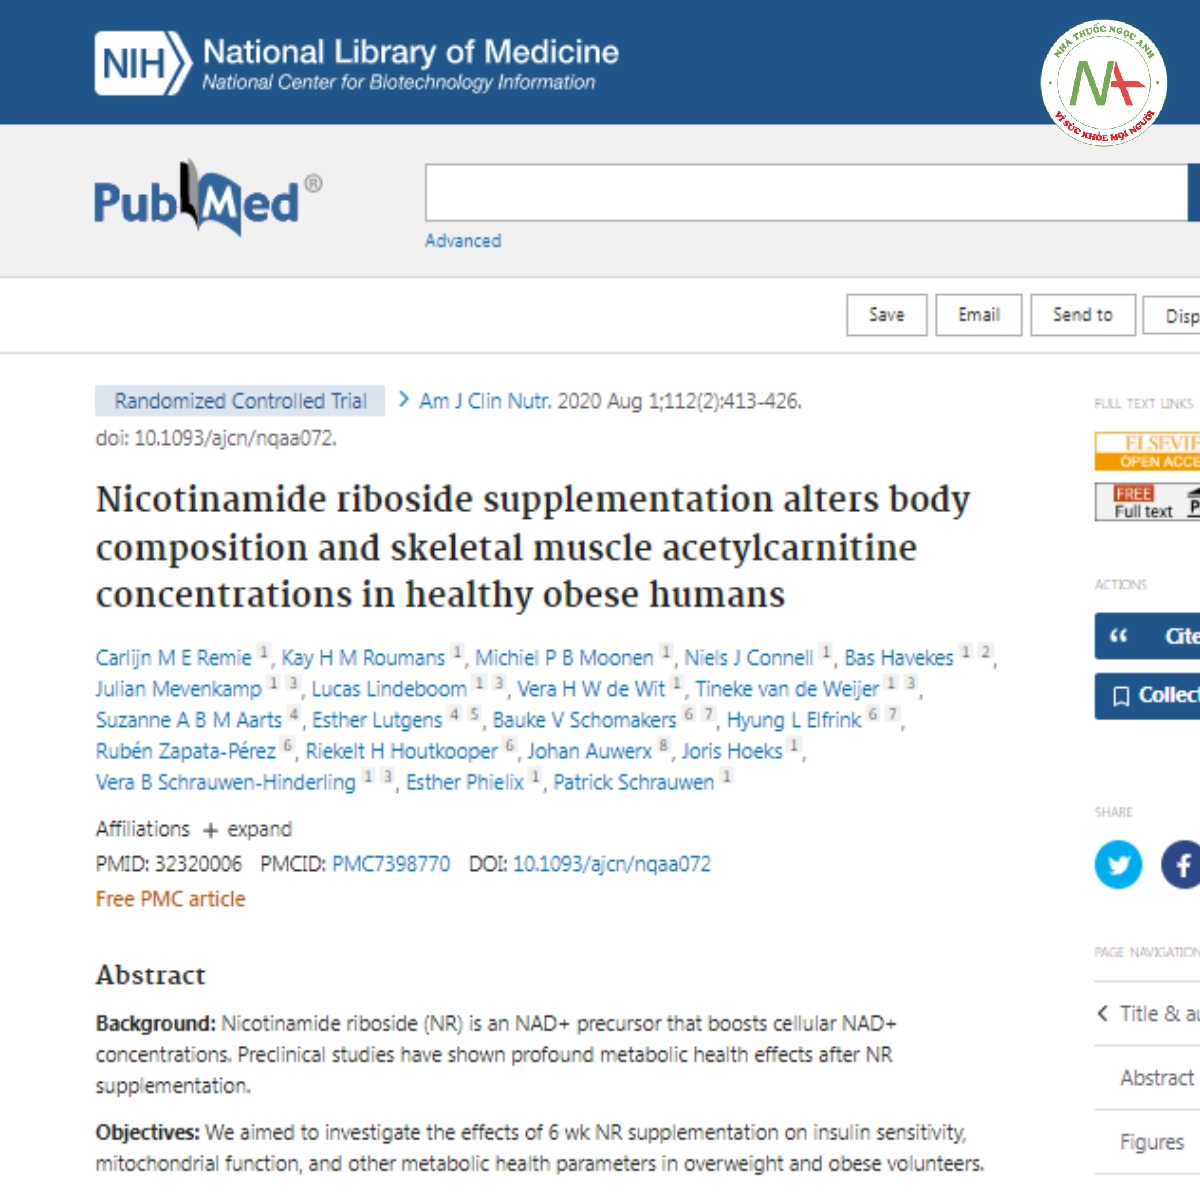 Nicotinamide riboside supplementation alters body composition and skeletal muscle acetylcarnitine concentrations in healthy obese humans